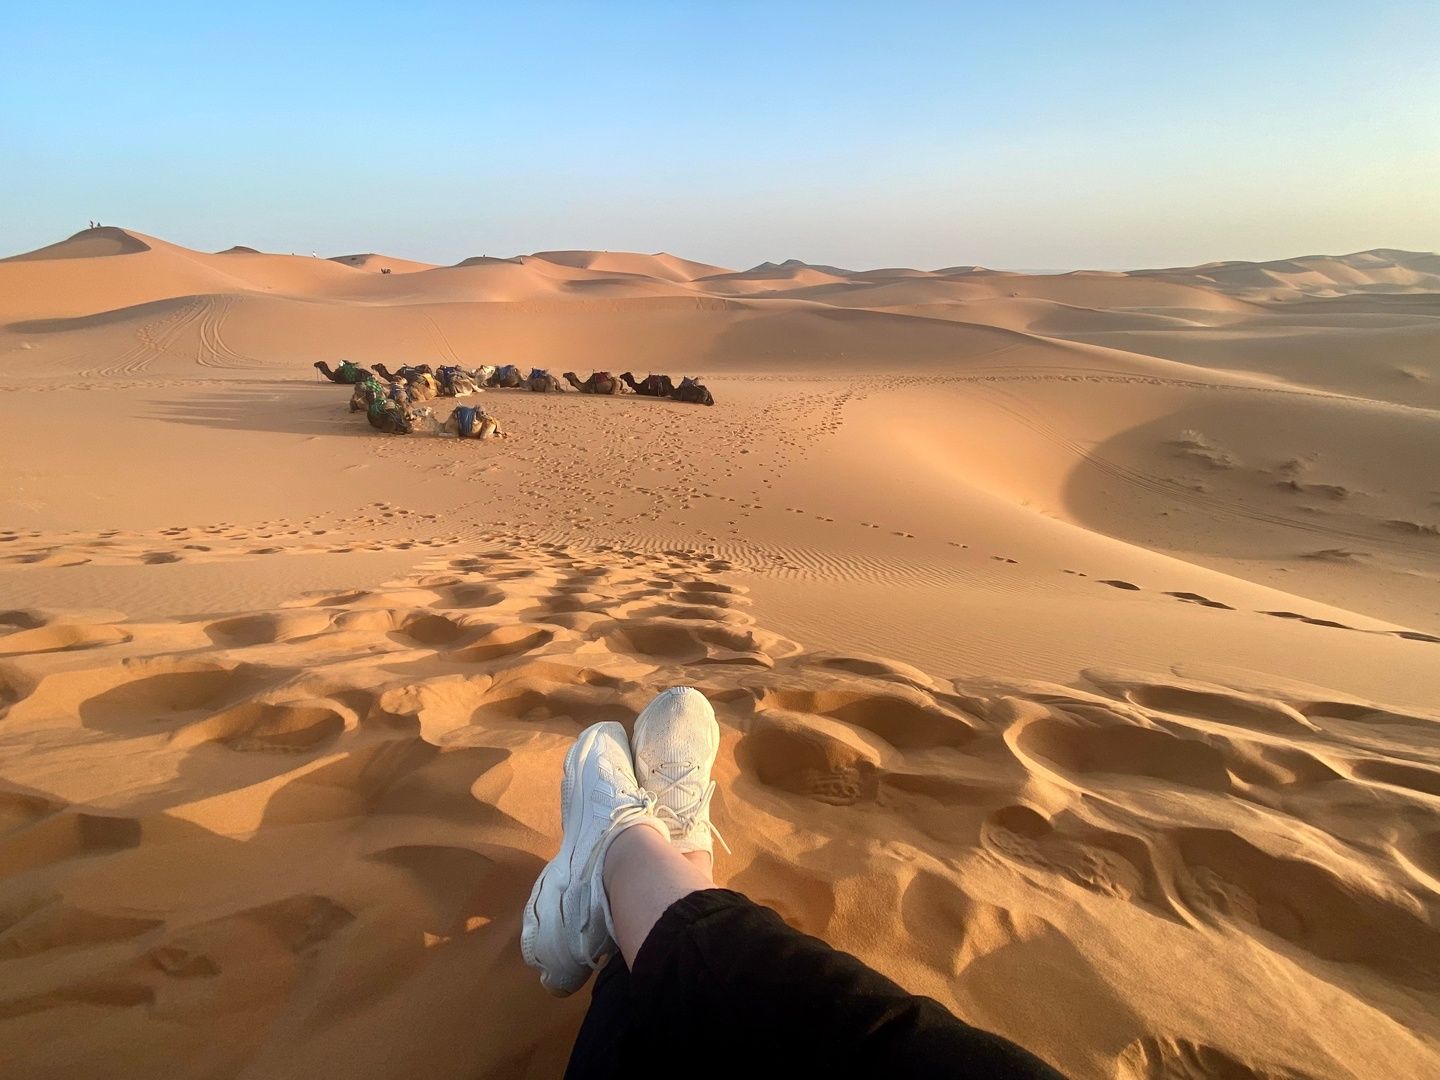 Relaxing in the desert with camels in the background